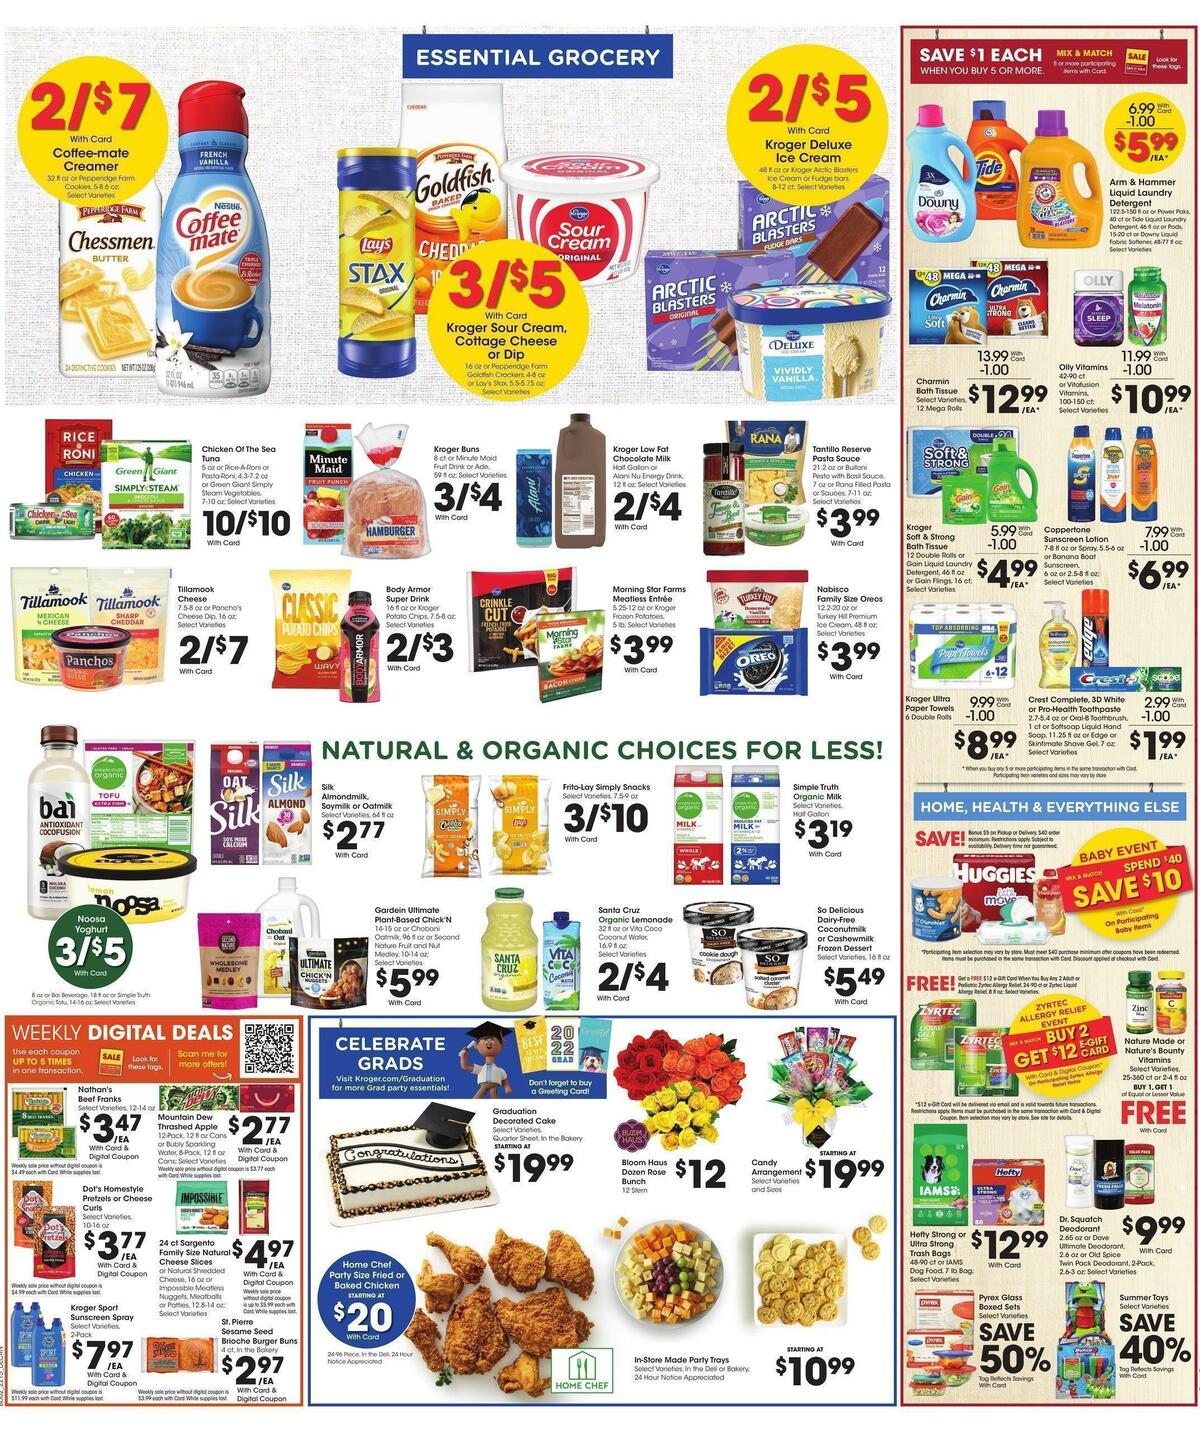 Kroger Weekly Ad from May 11